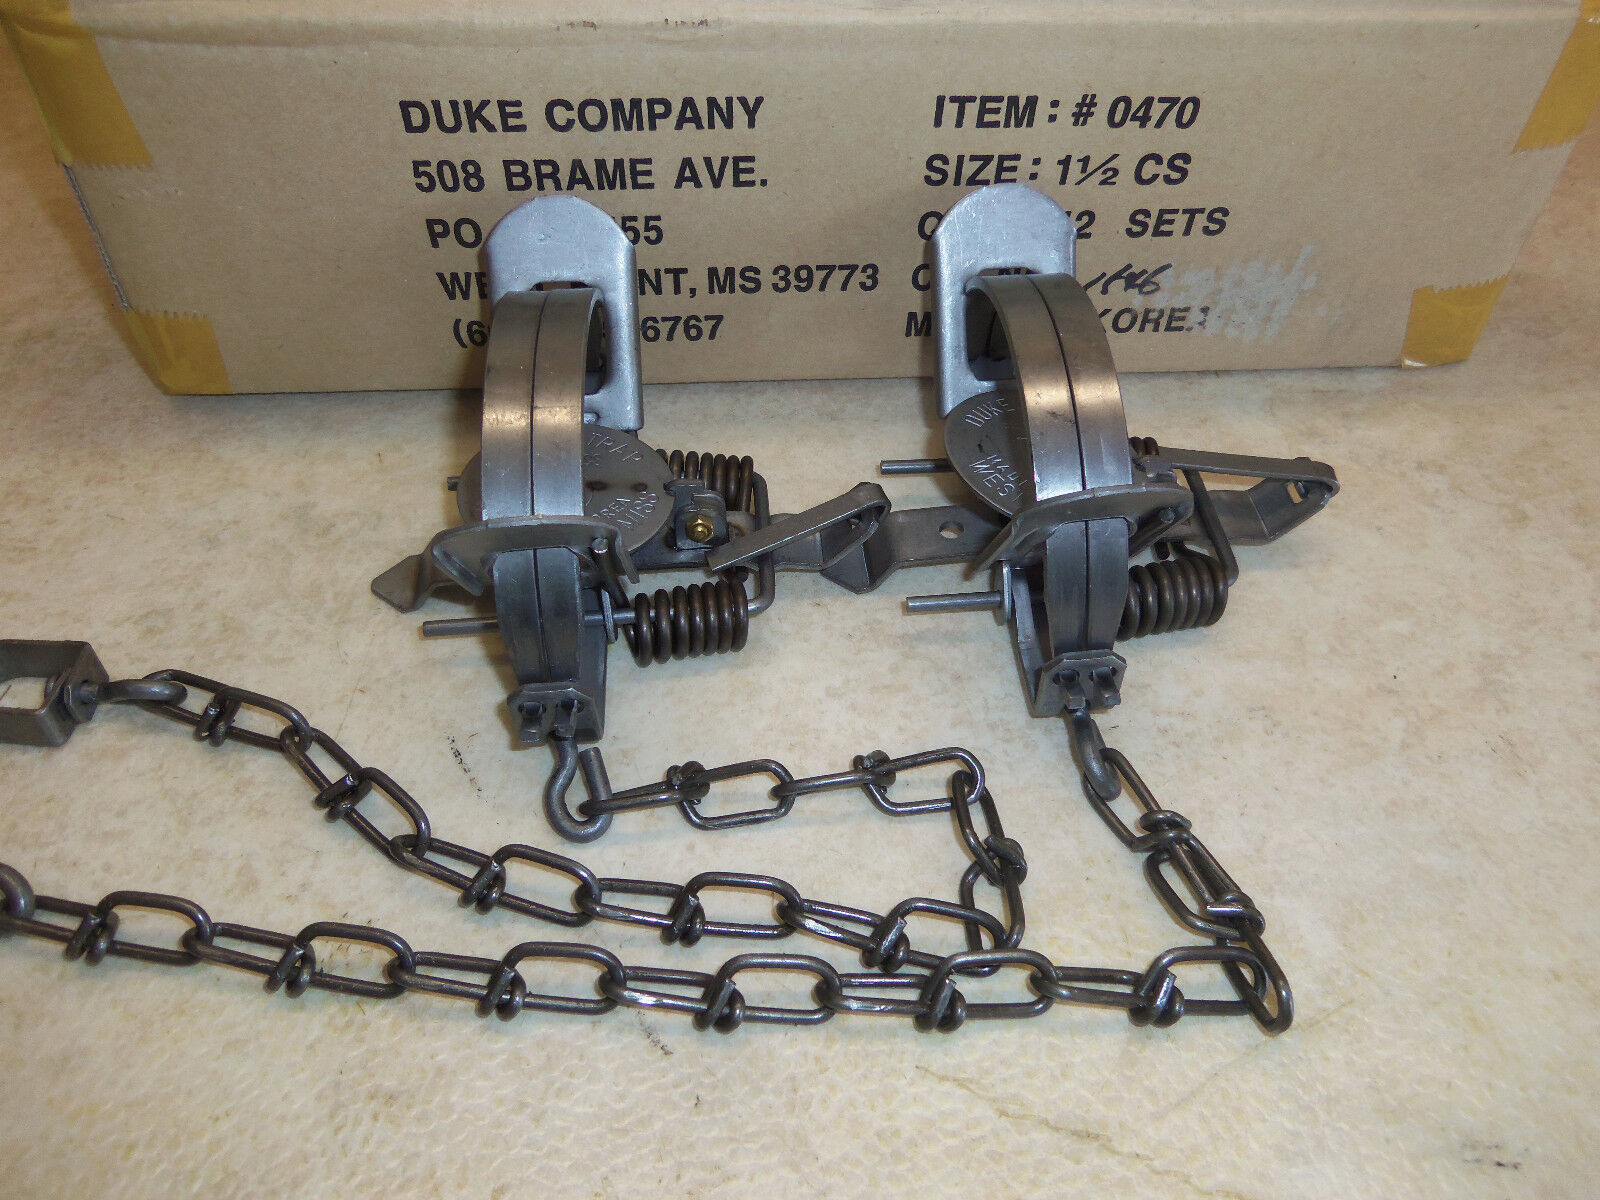 2 New Duke Traps # 1 1/2 Coil Spring Traps 0470 Raccoon Fox Nutria Trapping